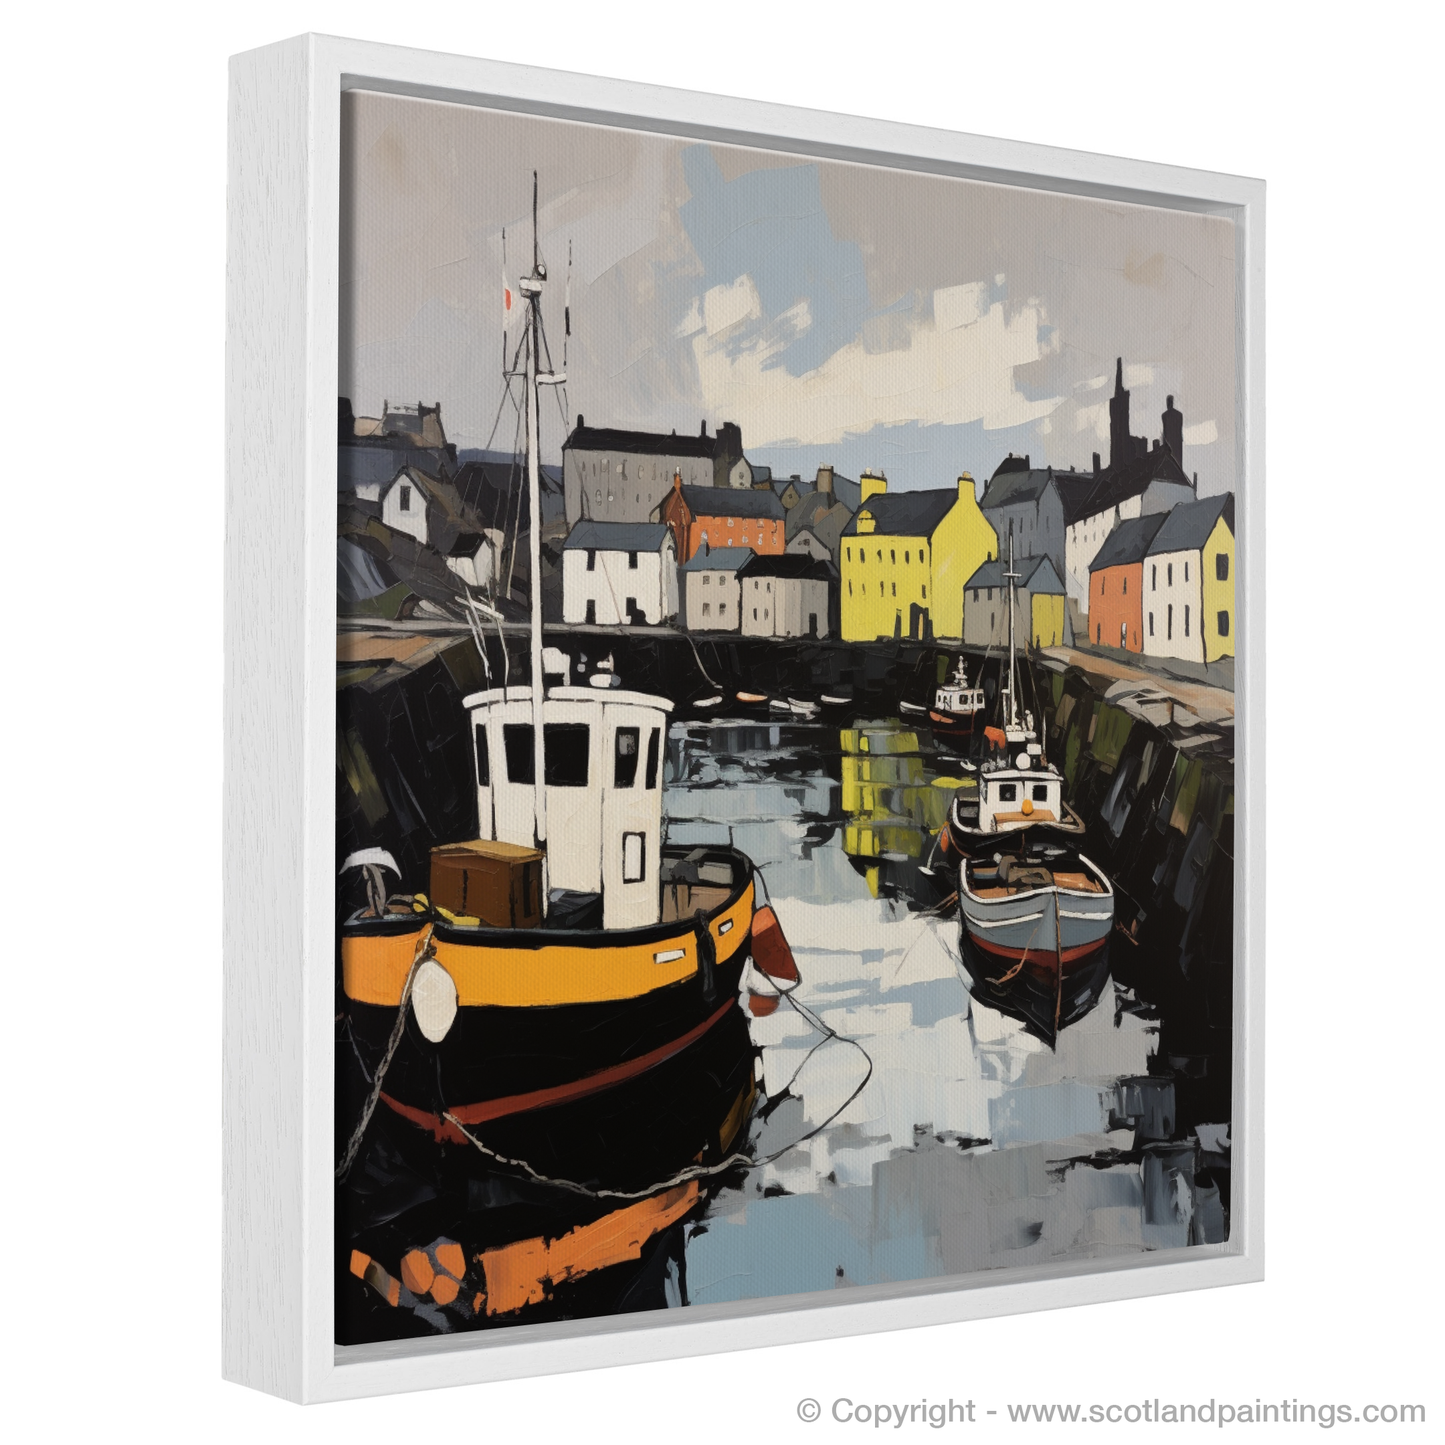 Painting and Art Print of Stornoway Harbour entitled "Stornoway Harbour Essence: An Expressionist Ode to Scottish Coastal Beauty".